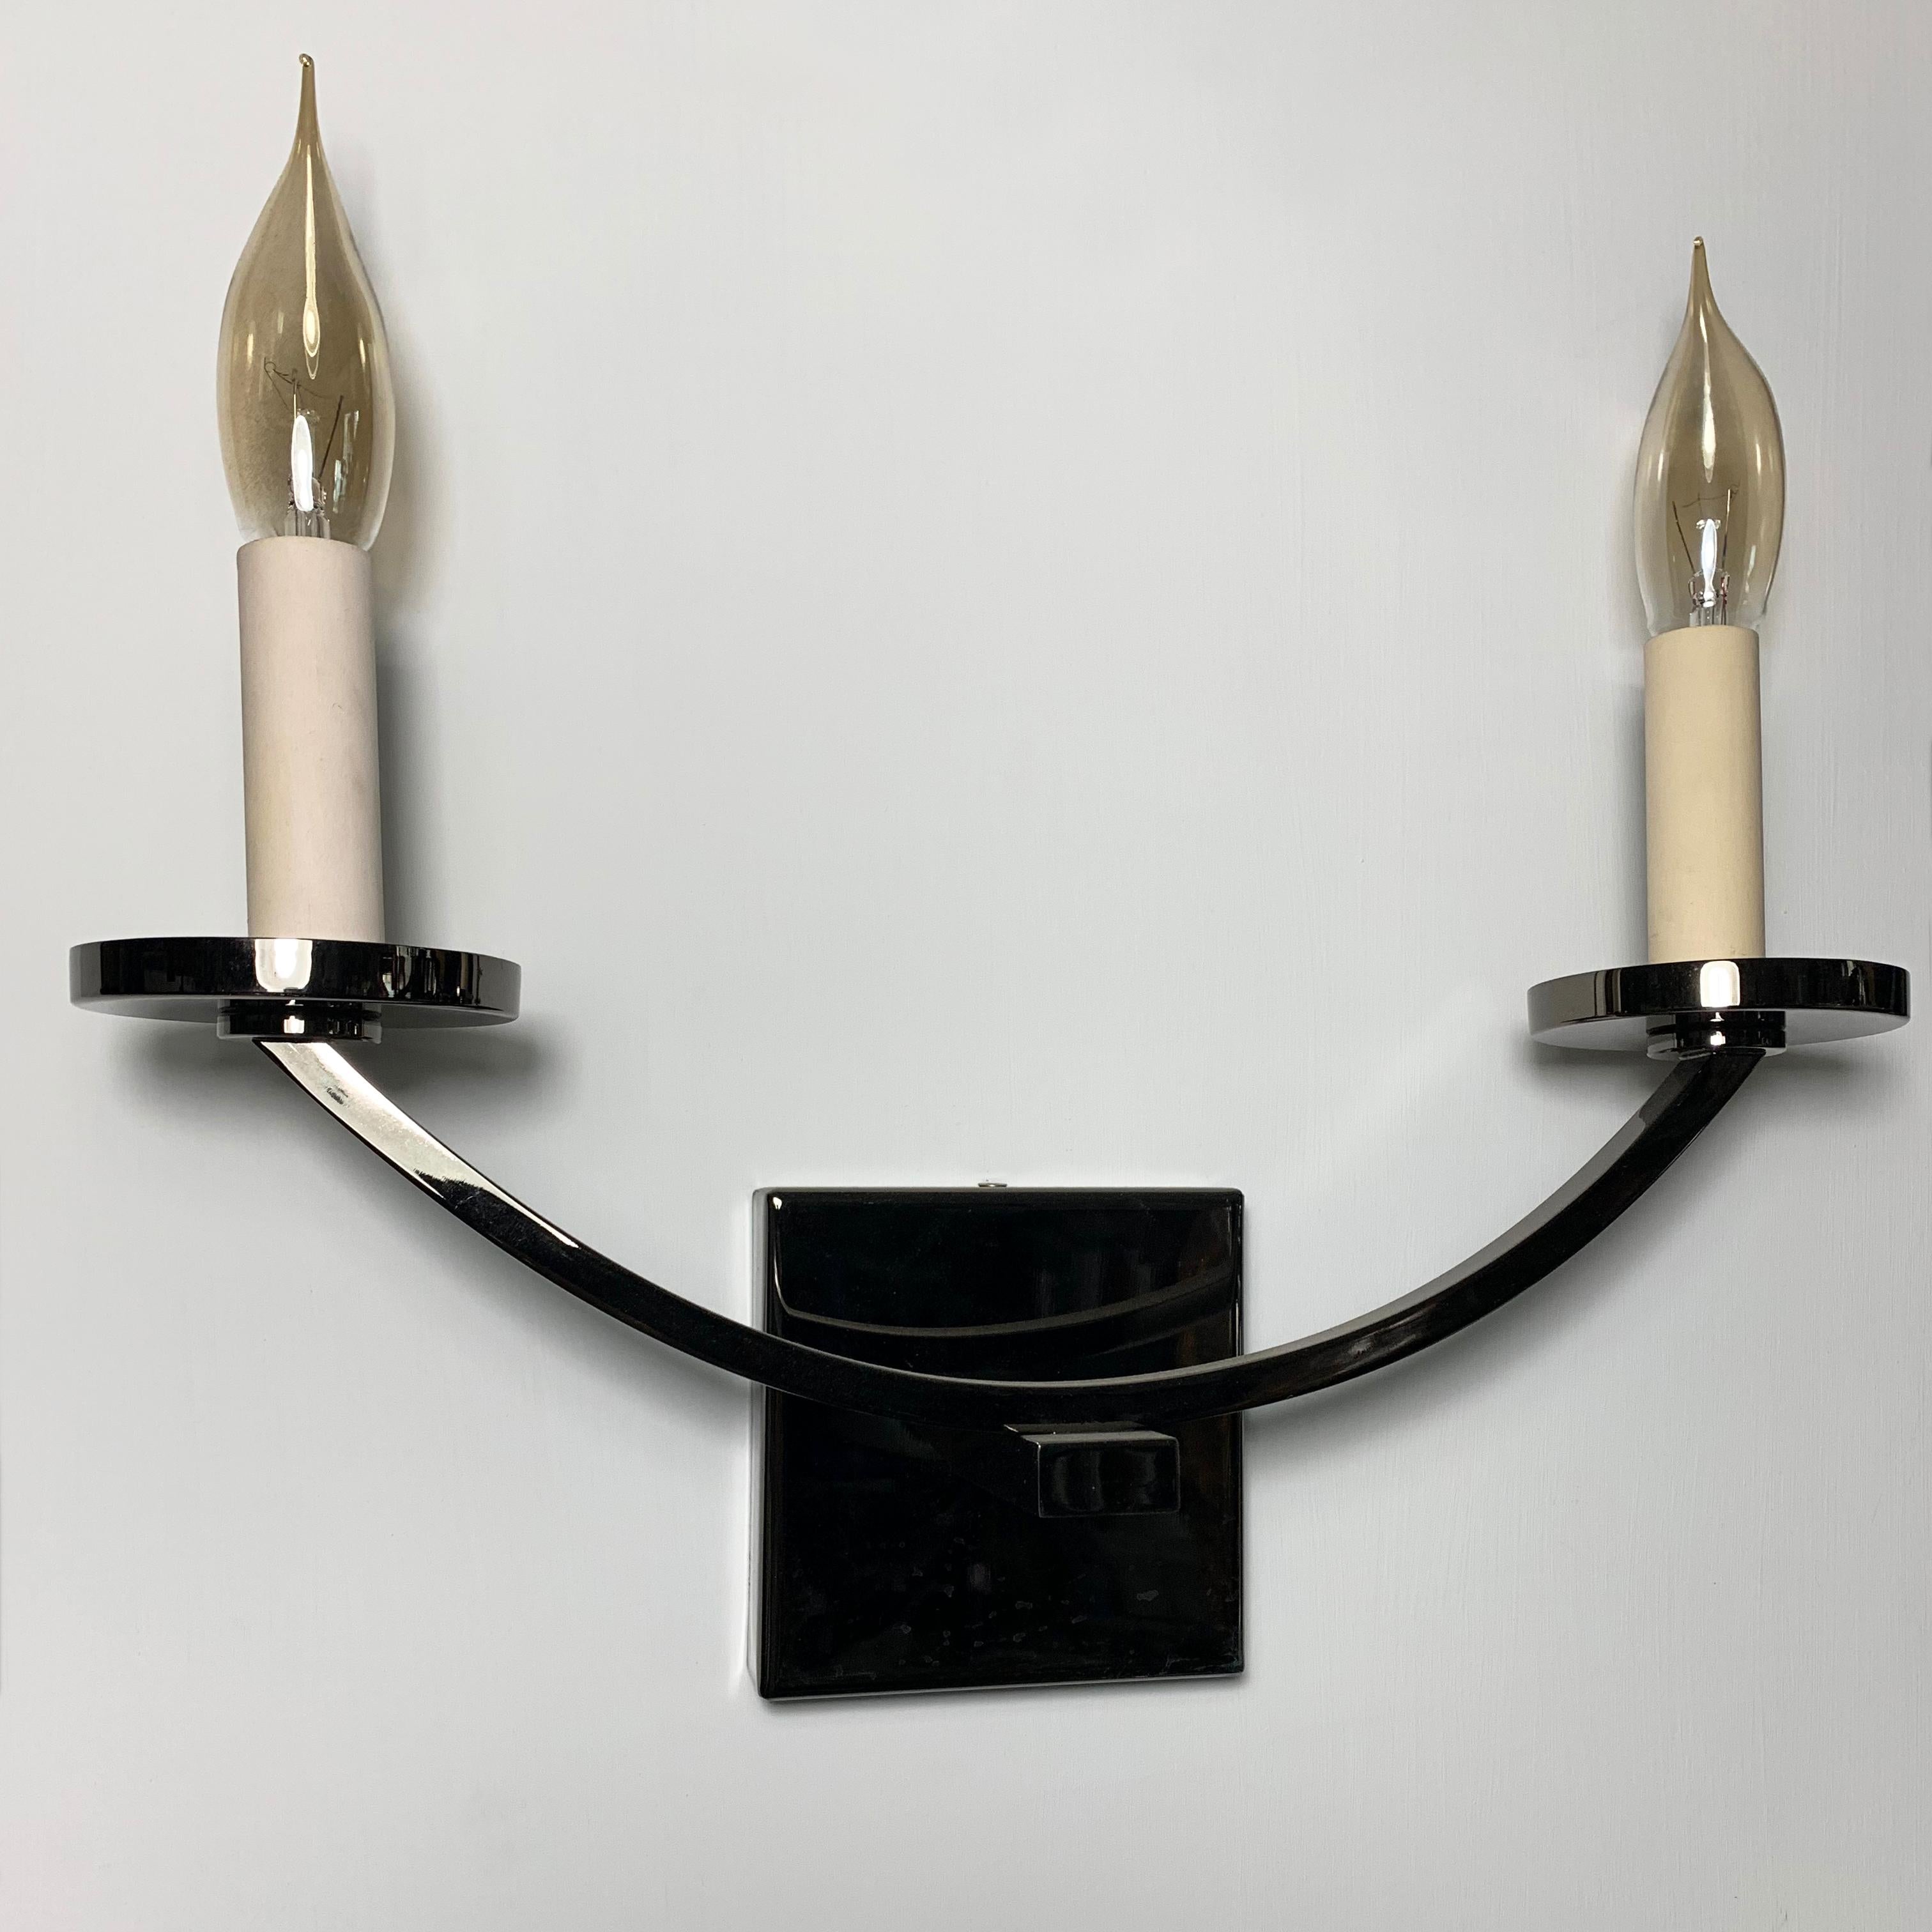 Original prototype.
Contemporary two-arm brass wall light with dark nickel plating.
Shown here with blue colored card-candles.
Also available, a rustic bronze version and a painted version.
Made in Italy.